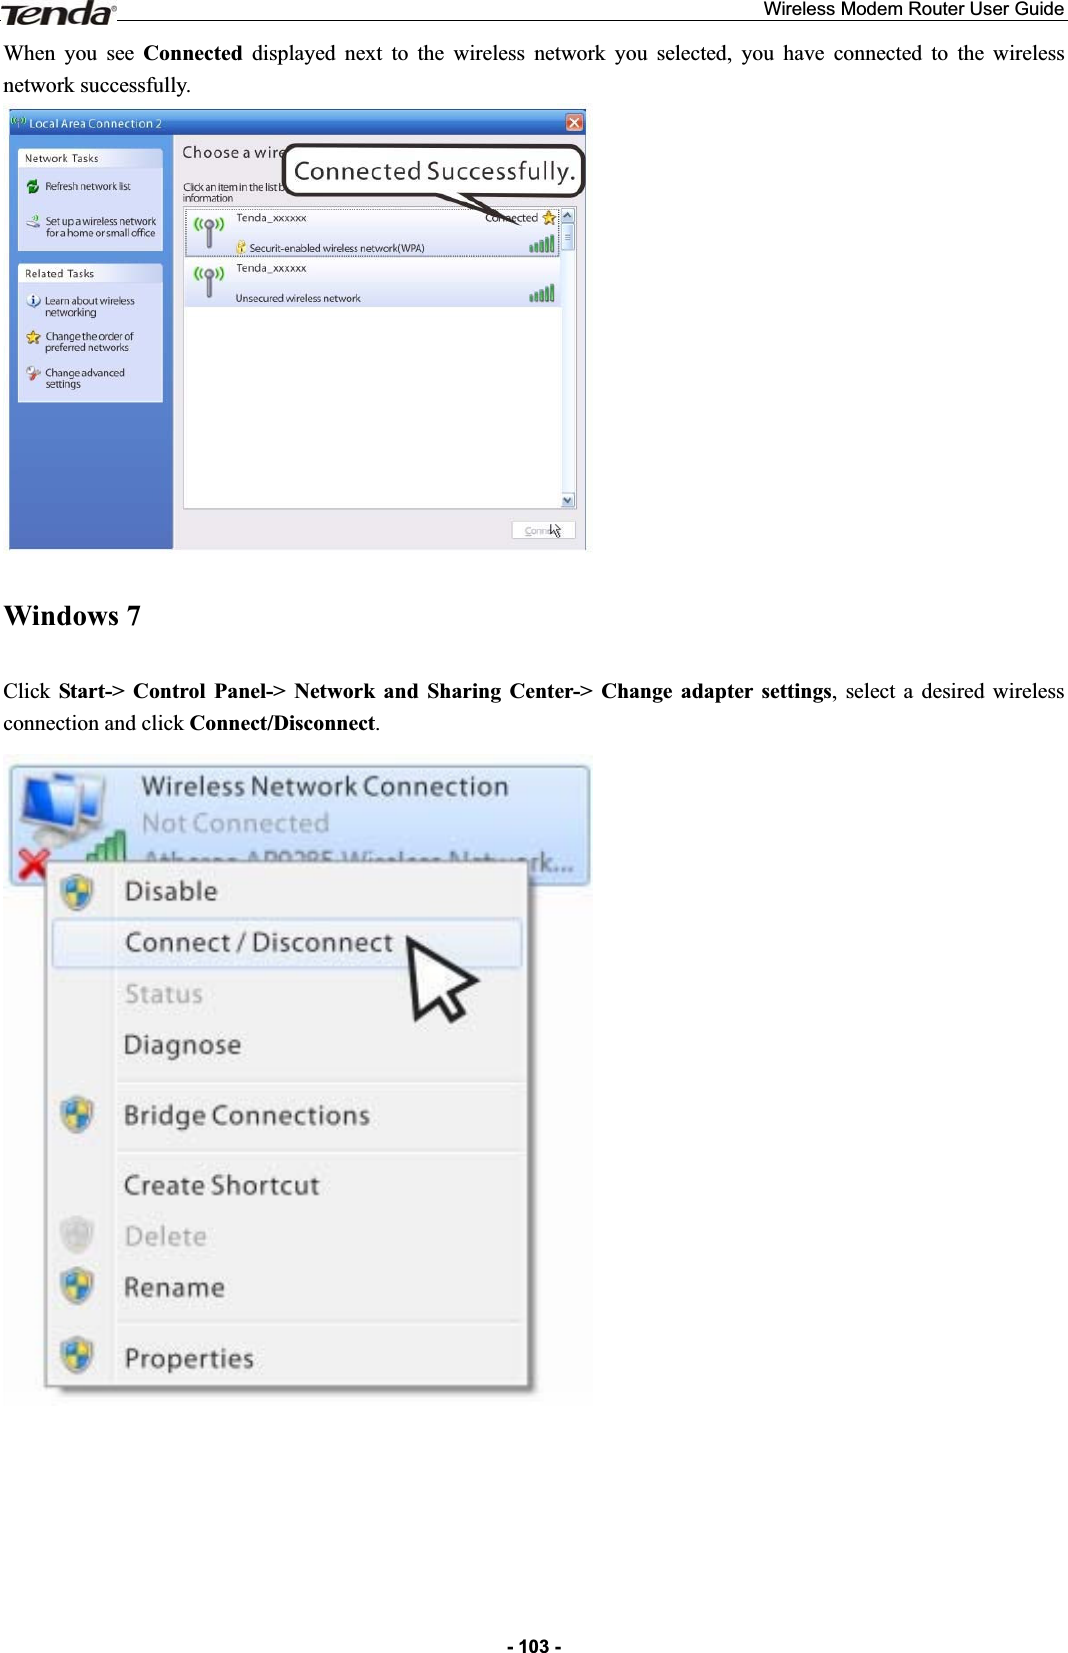 Wireless Modem Router User Guide- 103 -When you see Connected displayed next to the wireless network you selected, you have connected to the wireless network successfully. Windows 7 Click  Start-&gt; Control Panel-&gt; Network and Sharing Center-&gt; Change adapter settings, select a desired wireless connection and click Connect/Disconnect.